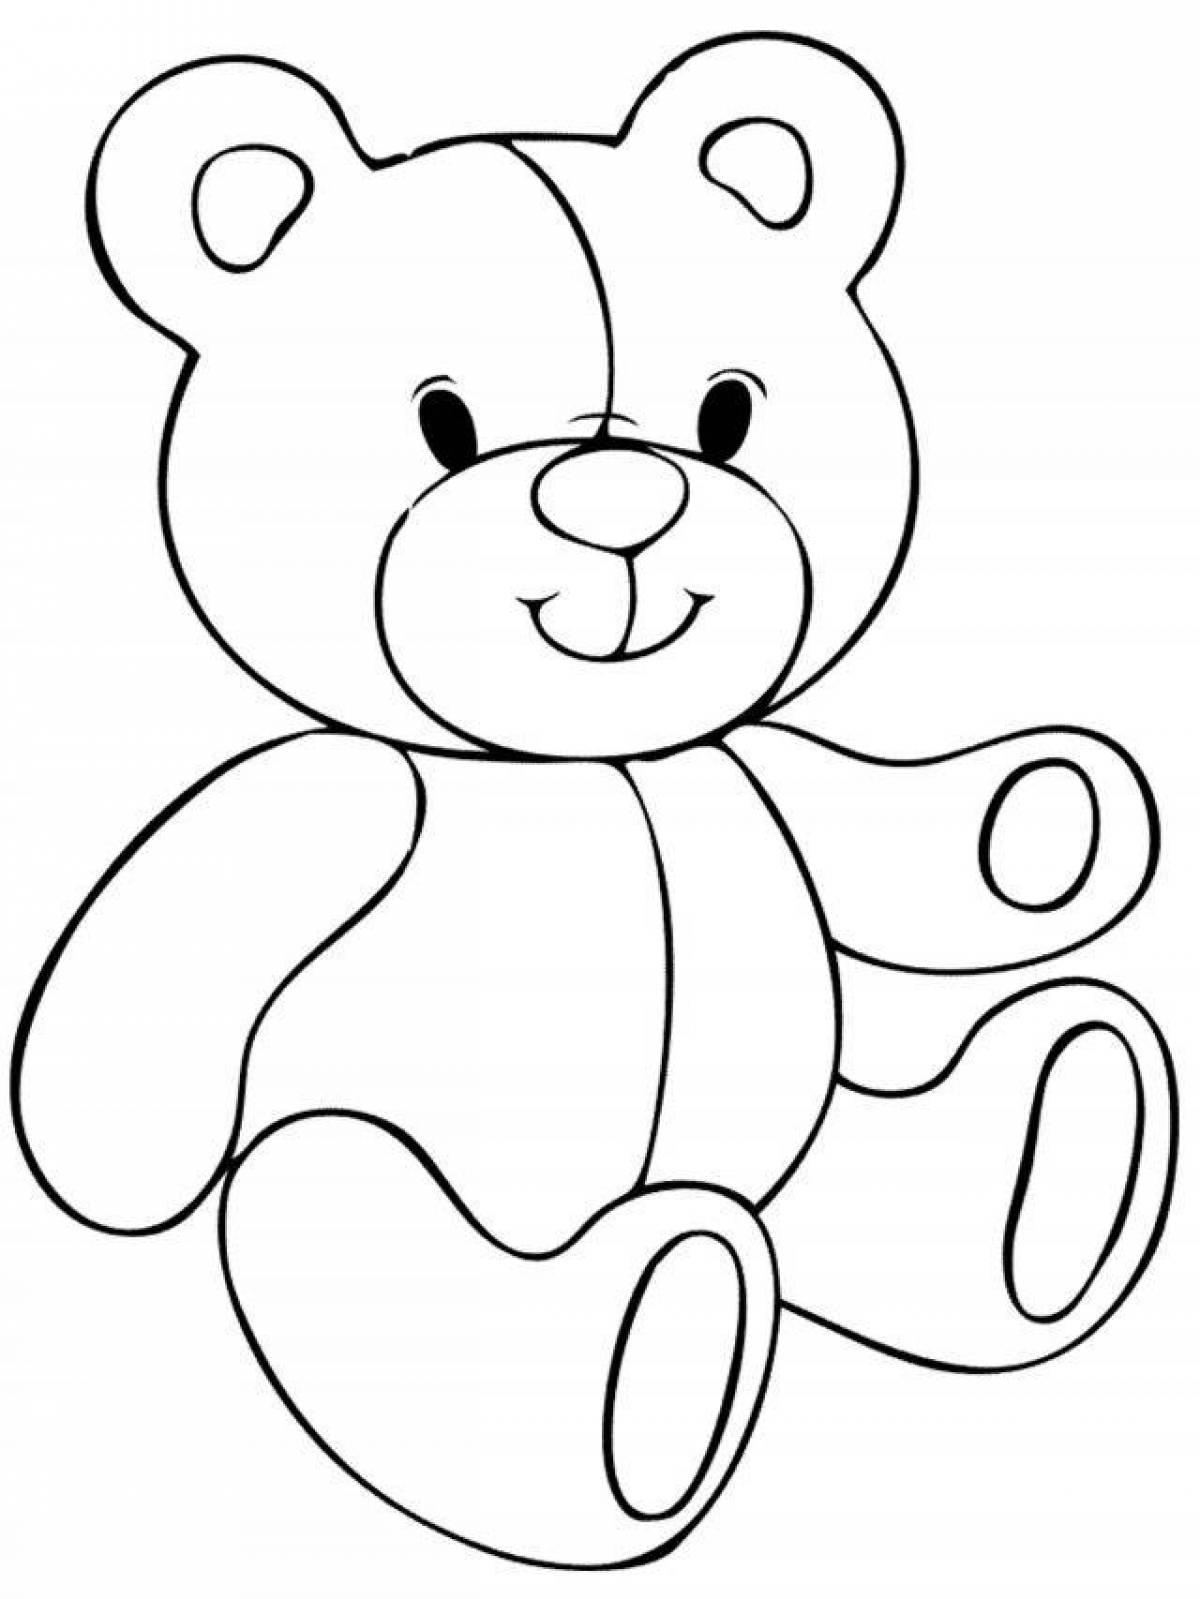 Coloring book thoughtful teddy bear